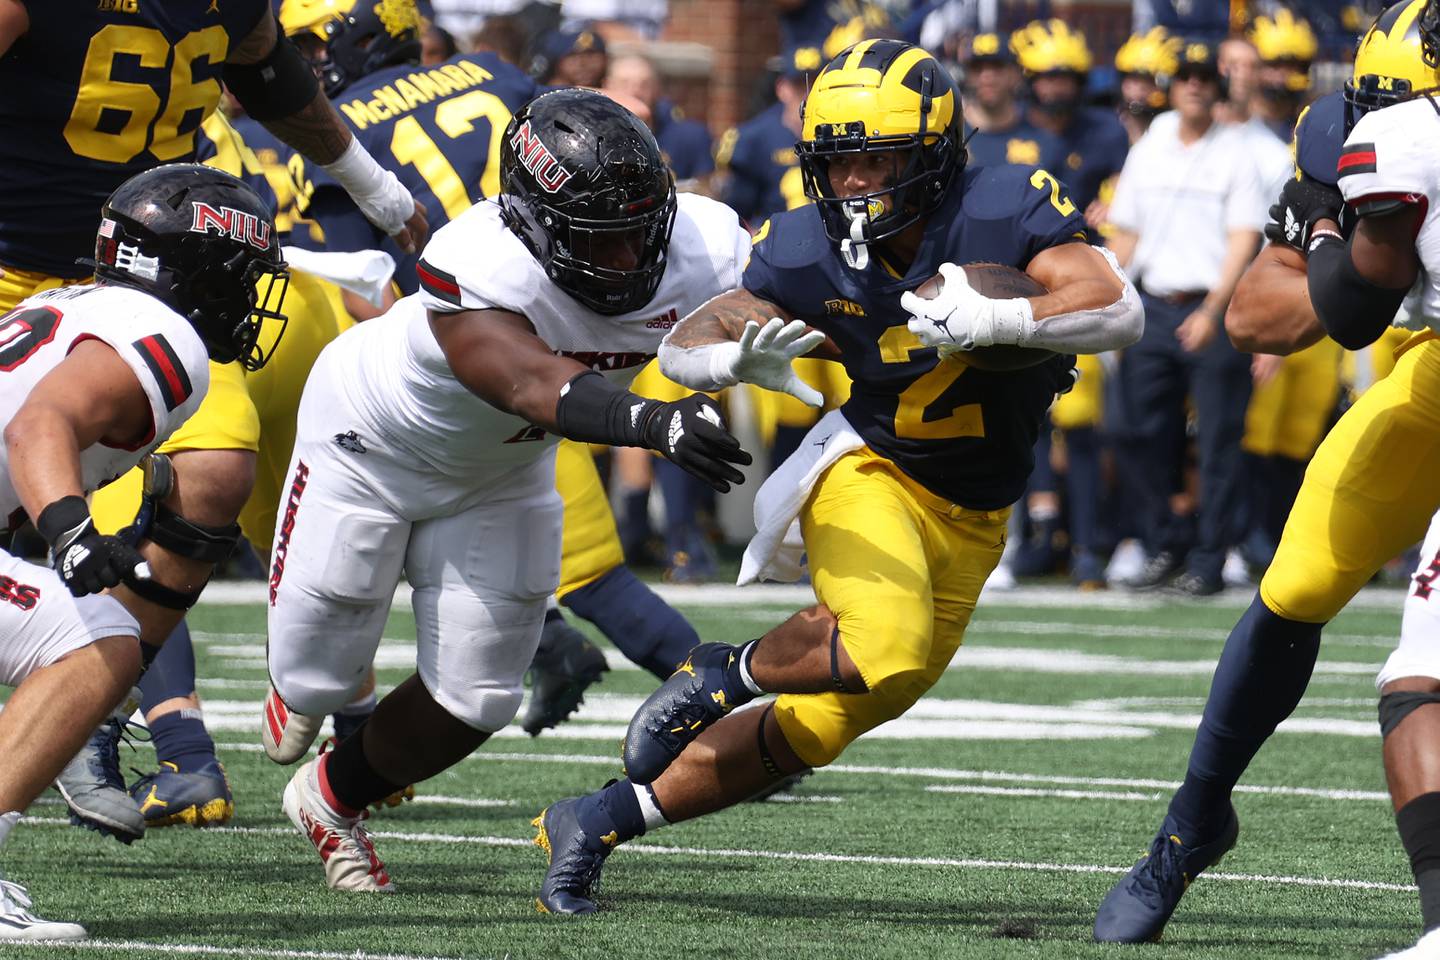 ANN ARBOR, MICHIGAN - SEPTEMBER 18: Blake Corum #2 of the Michigan Wolverines tries to get around the tackle of Nick Rattin #38 and James Ester #1 of the Northern Illinois Huskies during a first half run at Michigan Stadium on September 18, 2021 in Ann Arbor, Michigan.